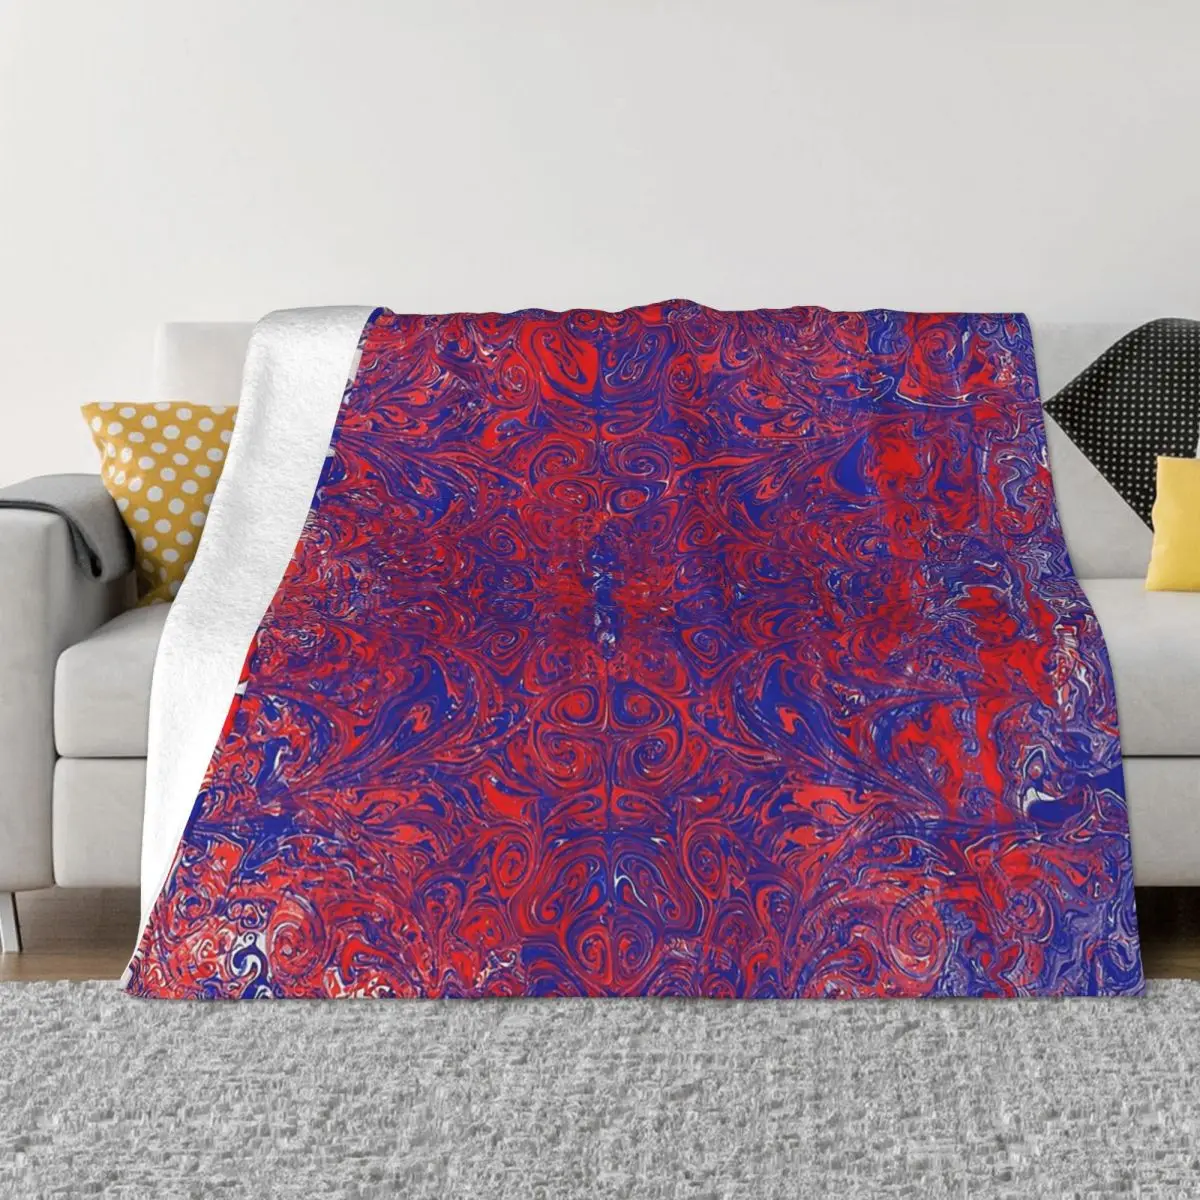 

Marbling Marbled Marble Pattern Blanket Flannel Balinese Goddess Abstract Red Blue White Palette Cozy Soft FLeece Bedspread